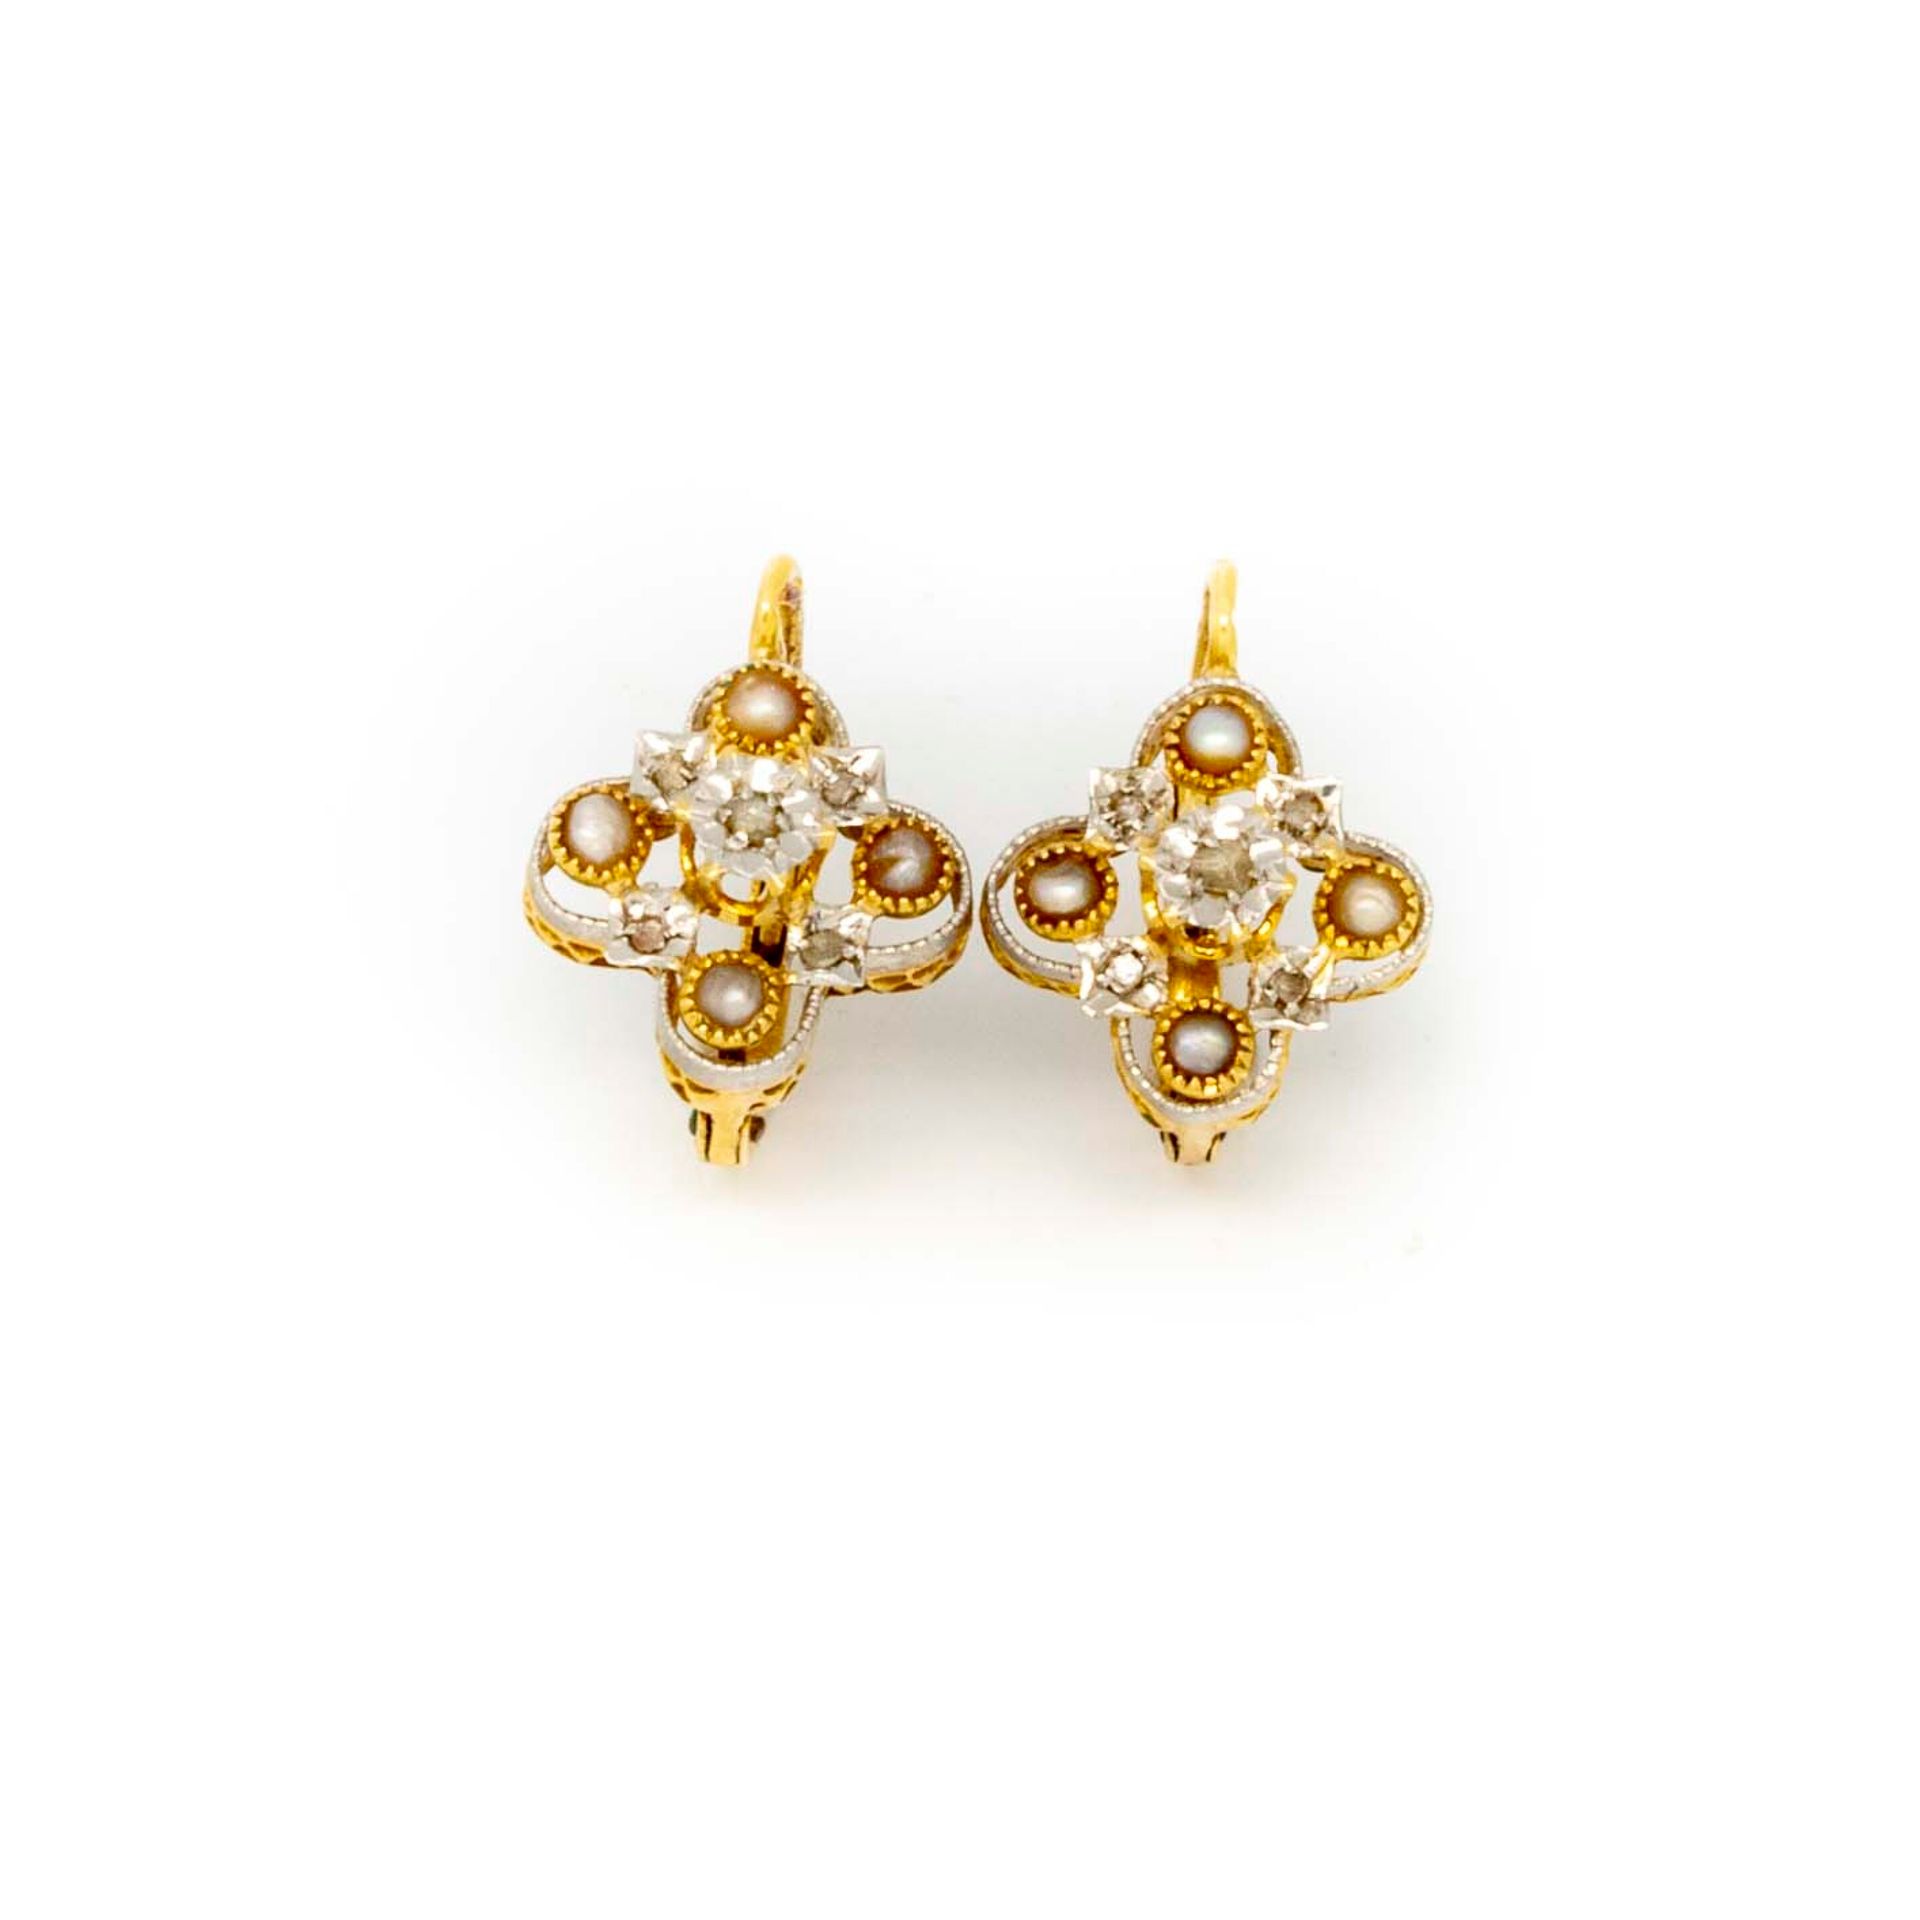 Null Pair of earrings in yellow gold, cloverleaf pattern with small pearls

Gros&hellip;